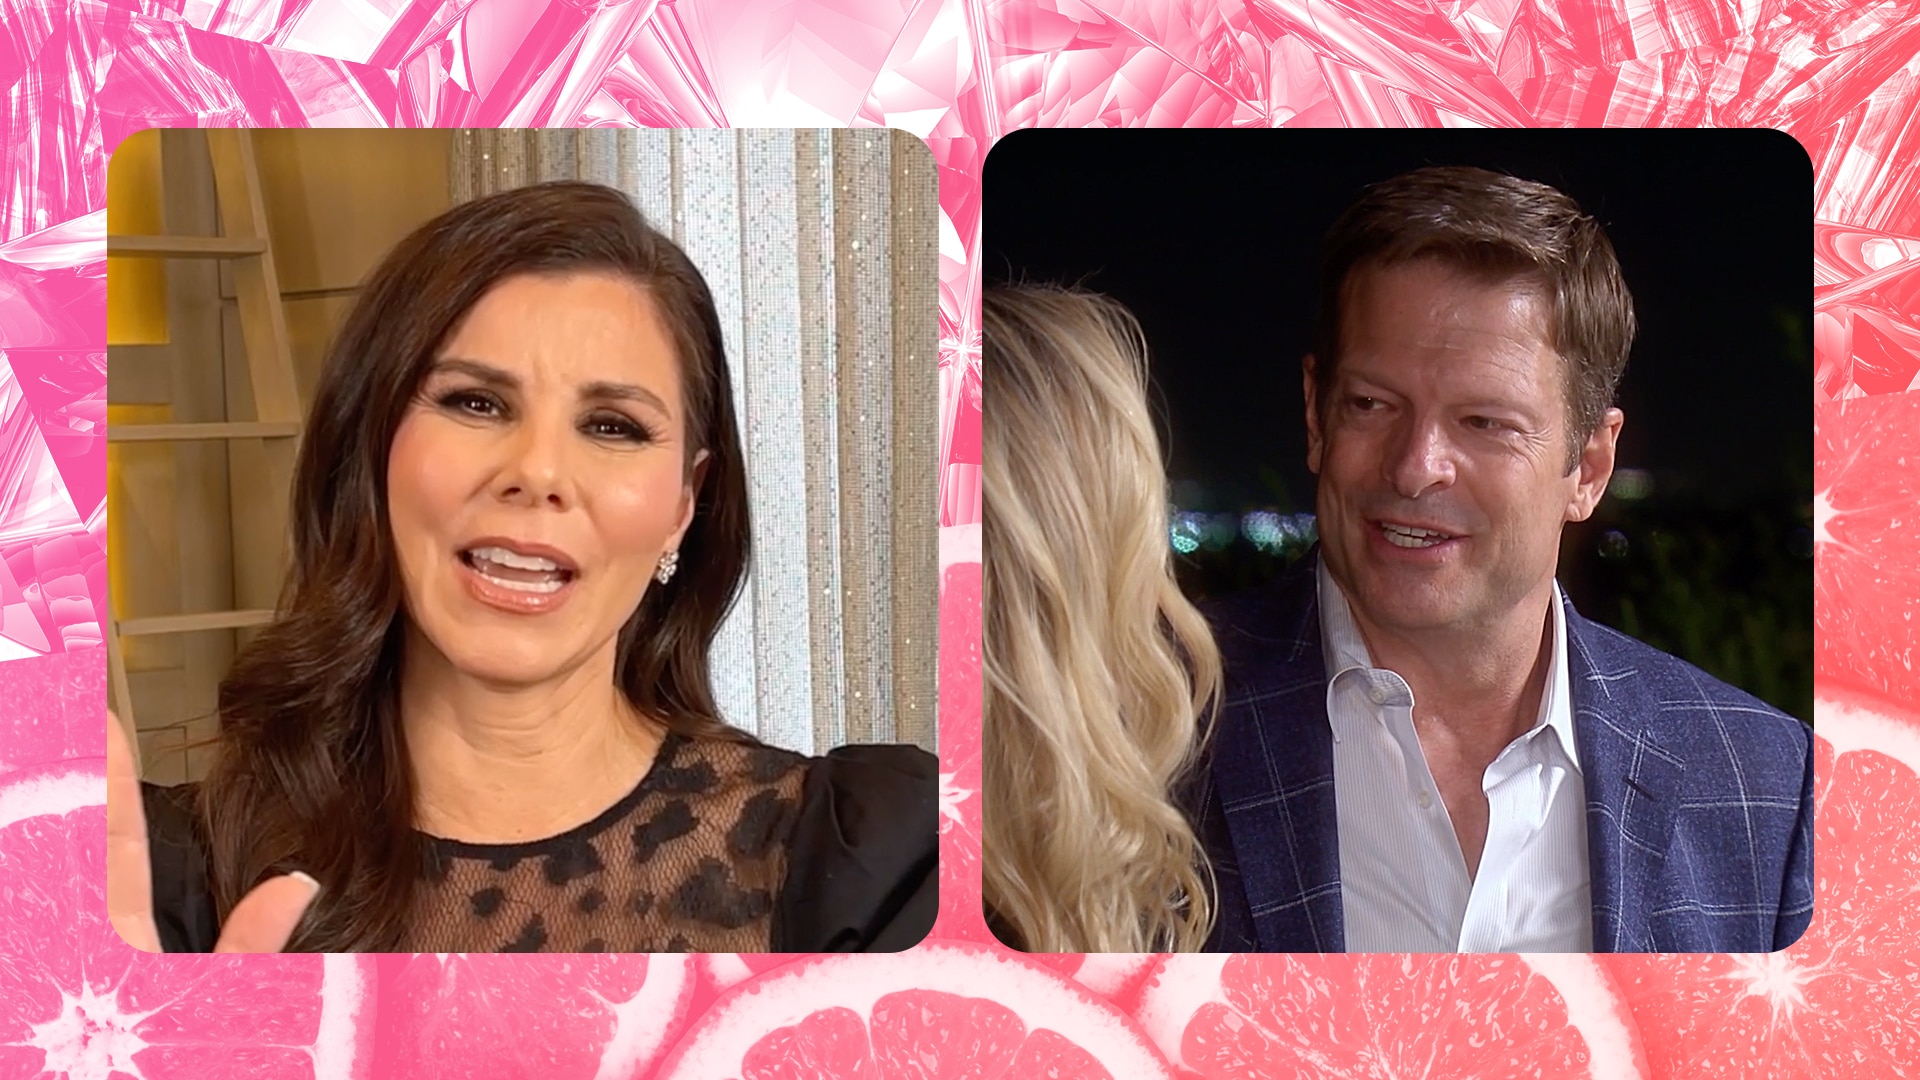 Heather Dubrow to John Janssen: "Stay out of the Female Drama"